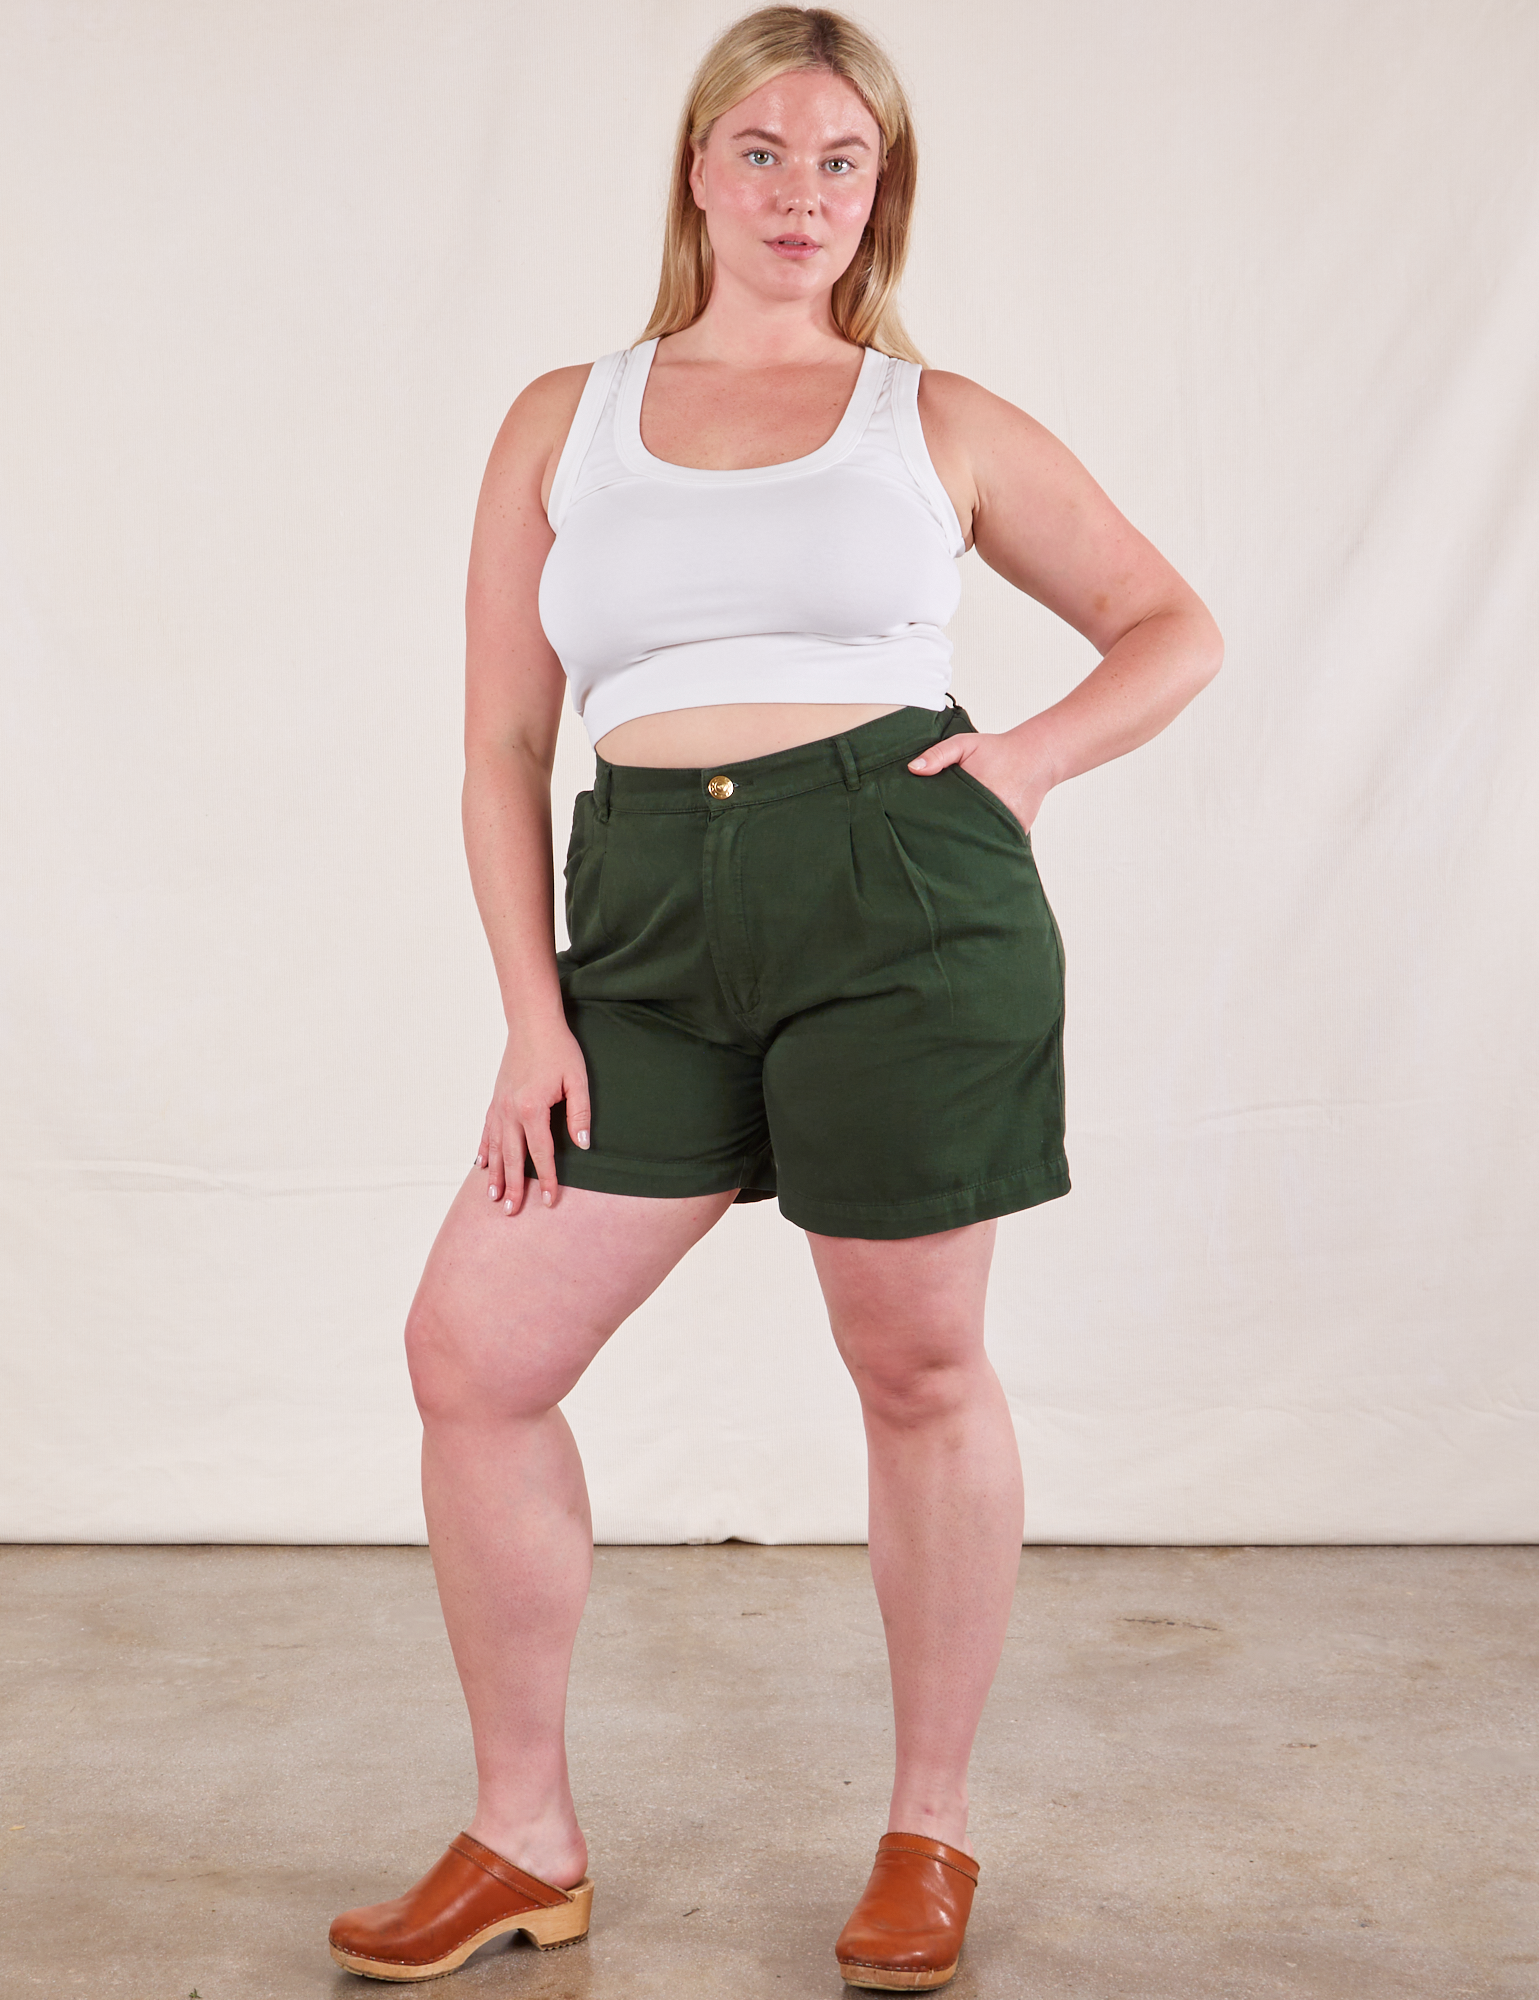 Lish is 5&#39;8&quot; and wearing M Trouser Shorts in Swamp Green paired with Cropped Tank Top in Vintage Tee Off-White